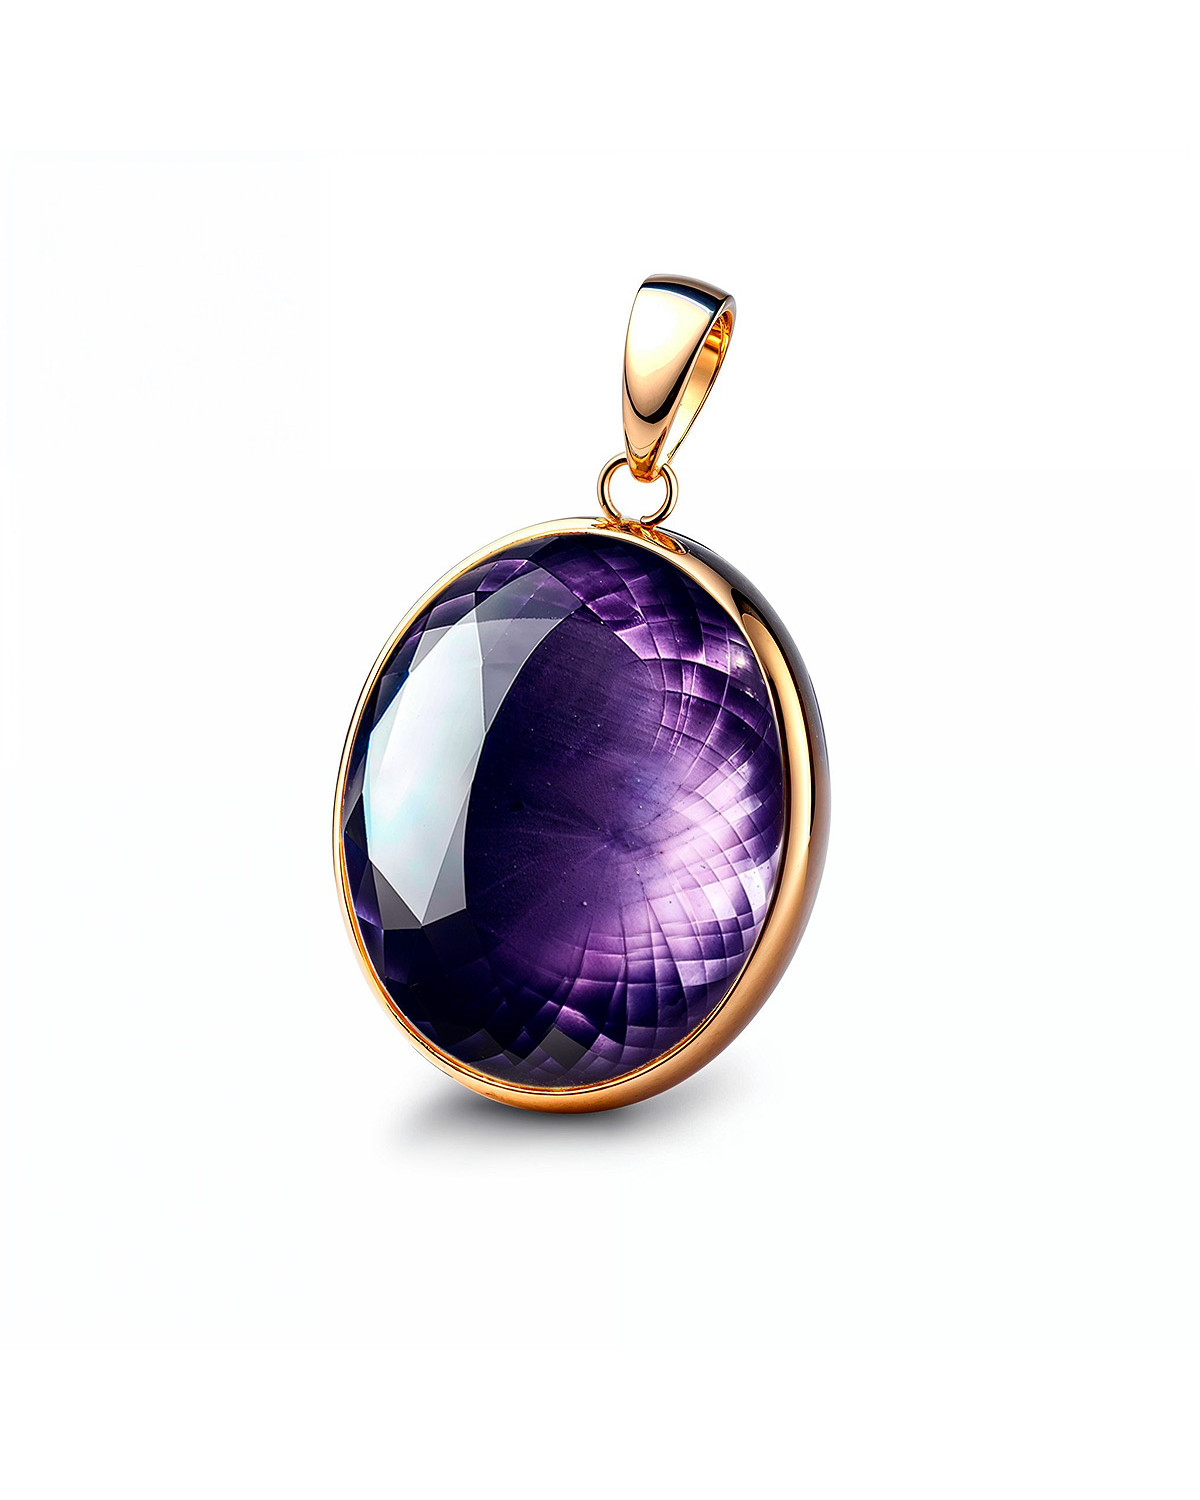 Oval Amethyst Pendant 25 mm x 20 mm set in 925 Sterling Silver with 18-carat fine gold plating